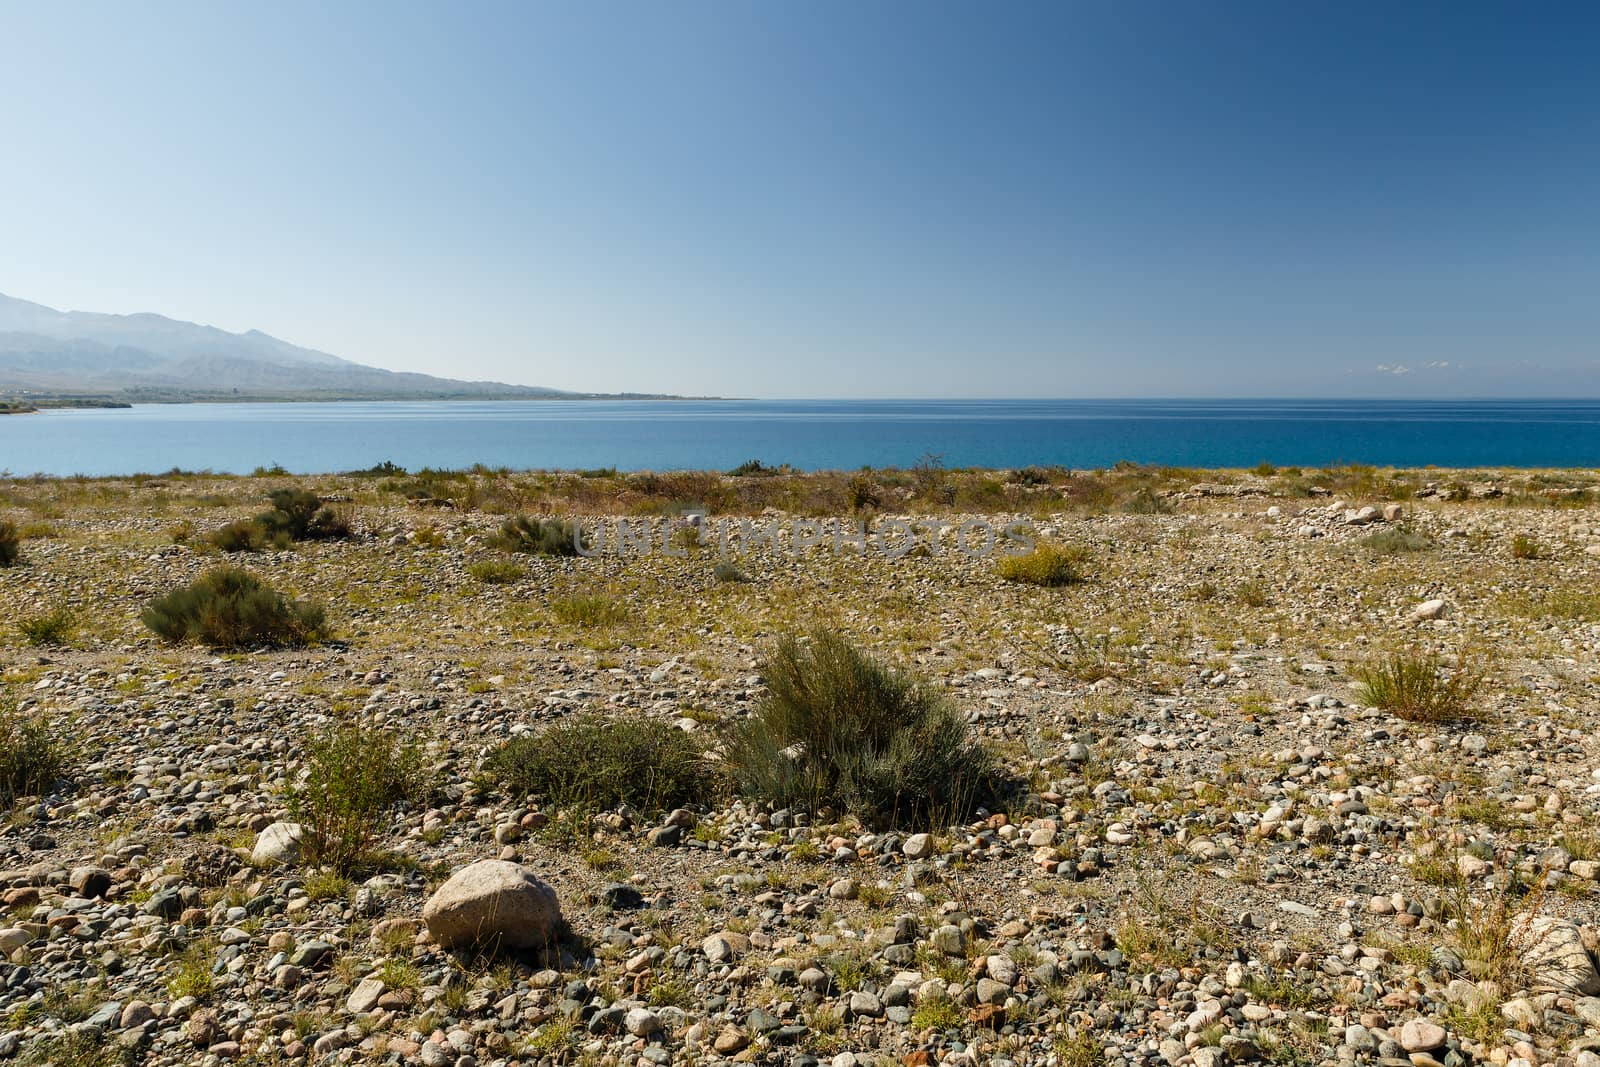 Lake Issyk-kul, the largest lake in Kyrgyzstan, pebbles on the south shore of the lake